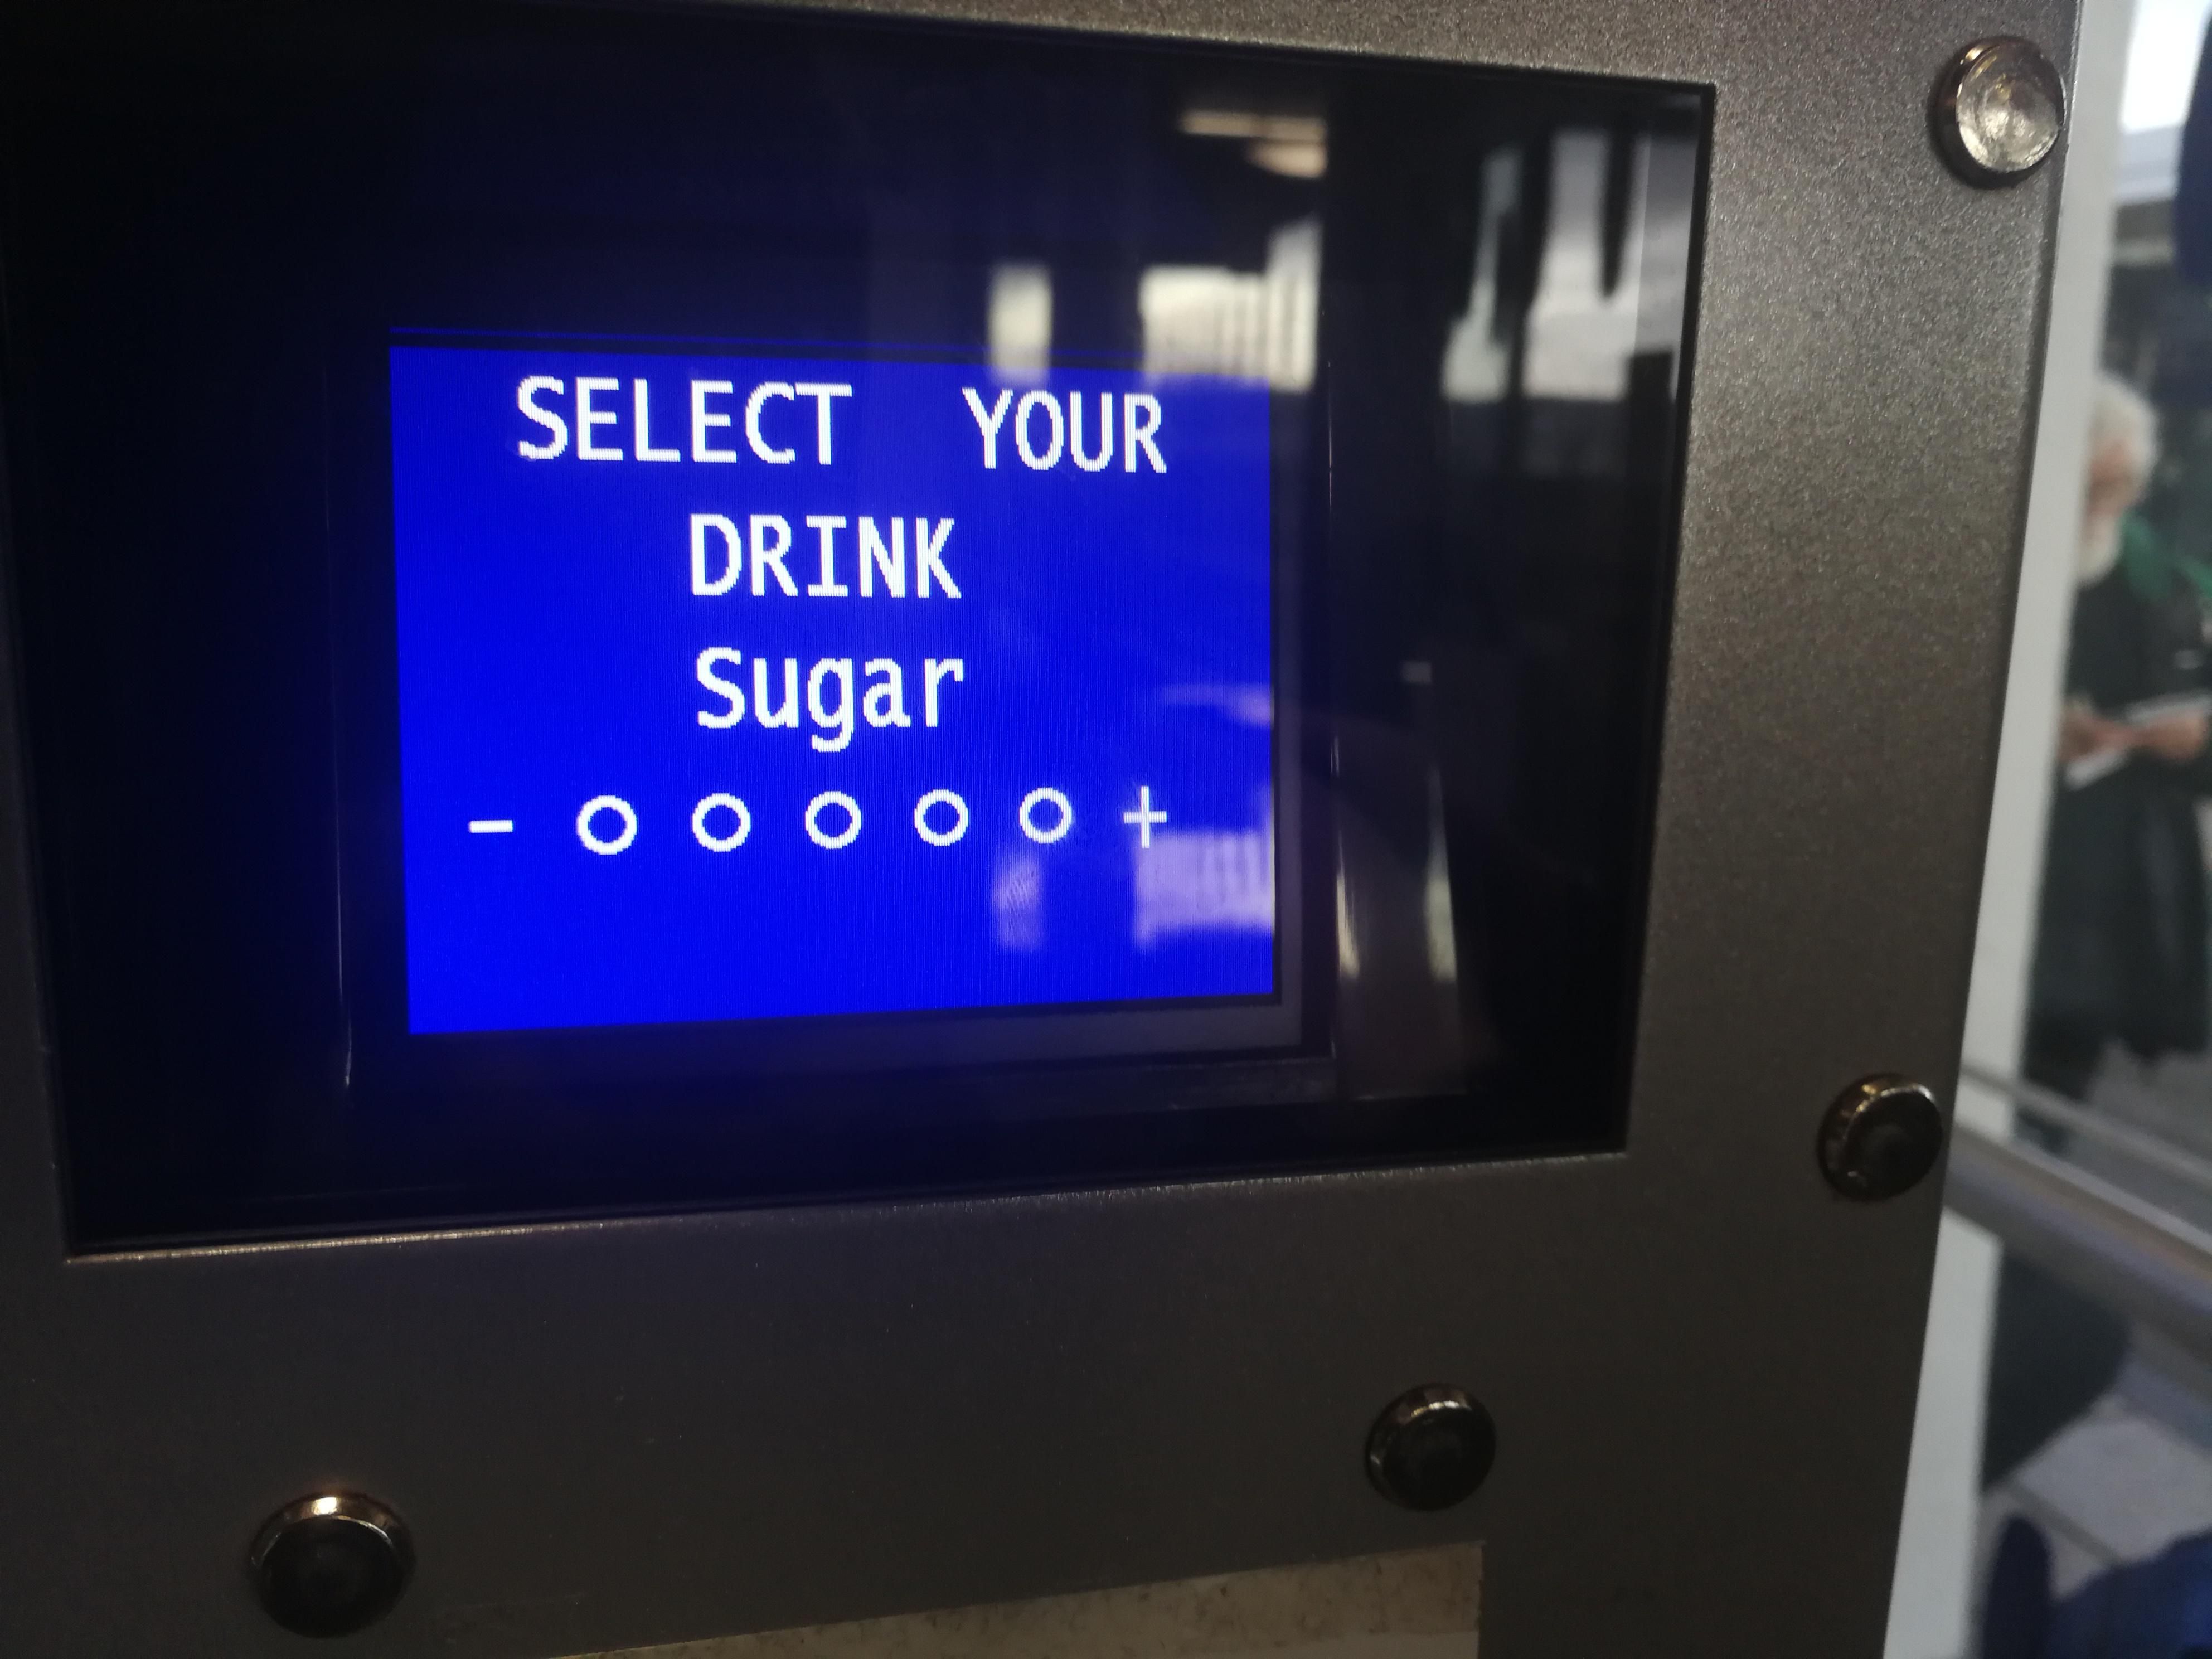 I think this coffee machine is flirting with me